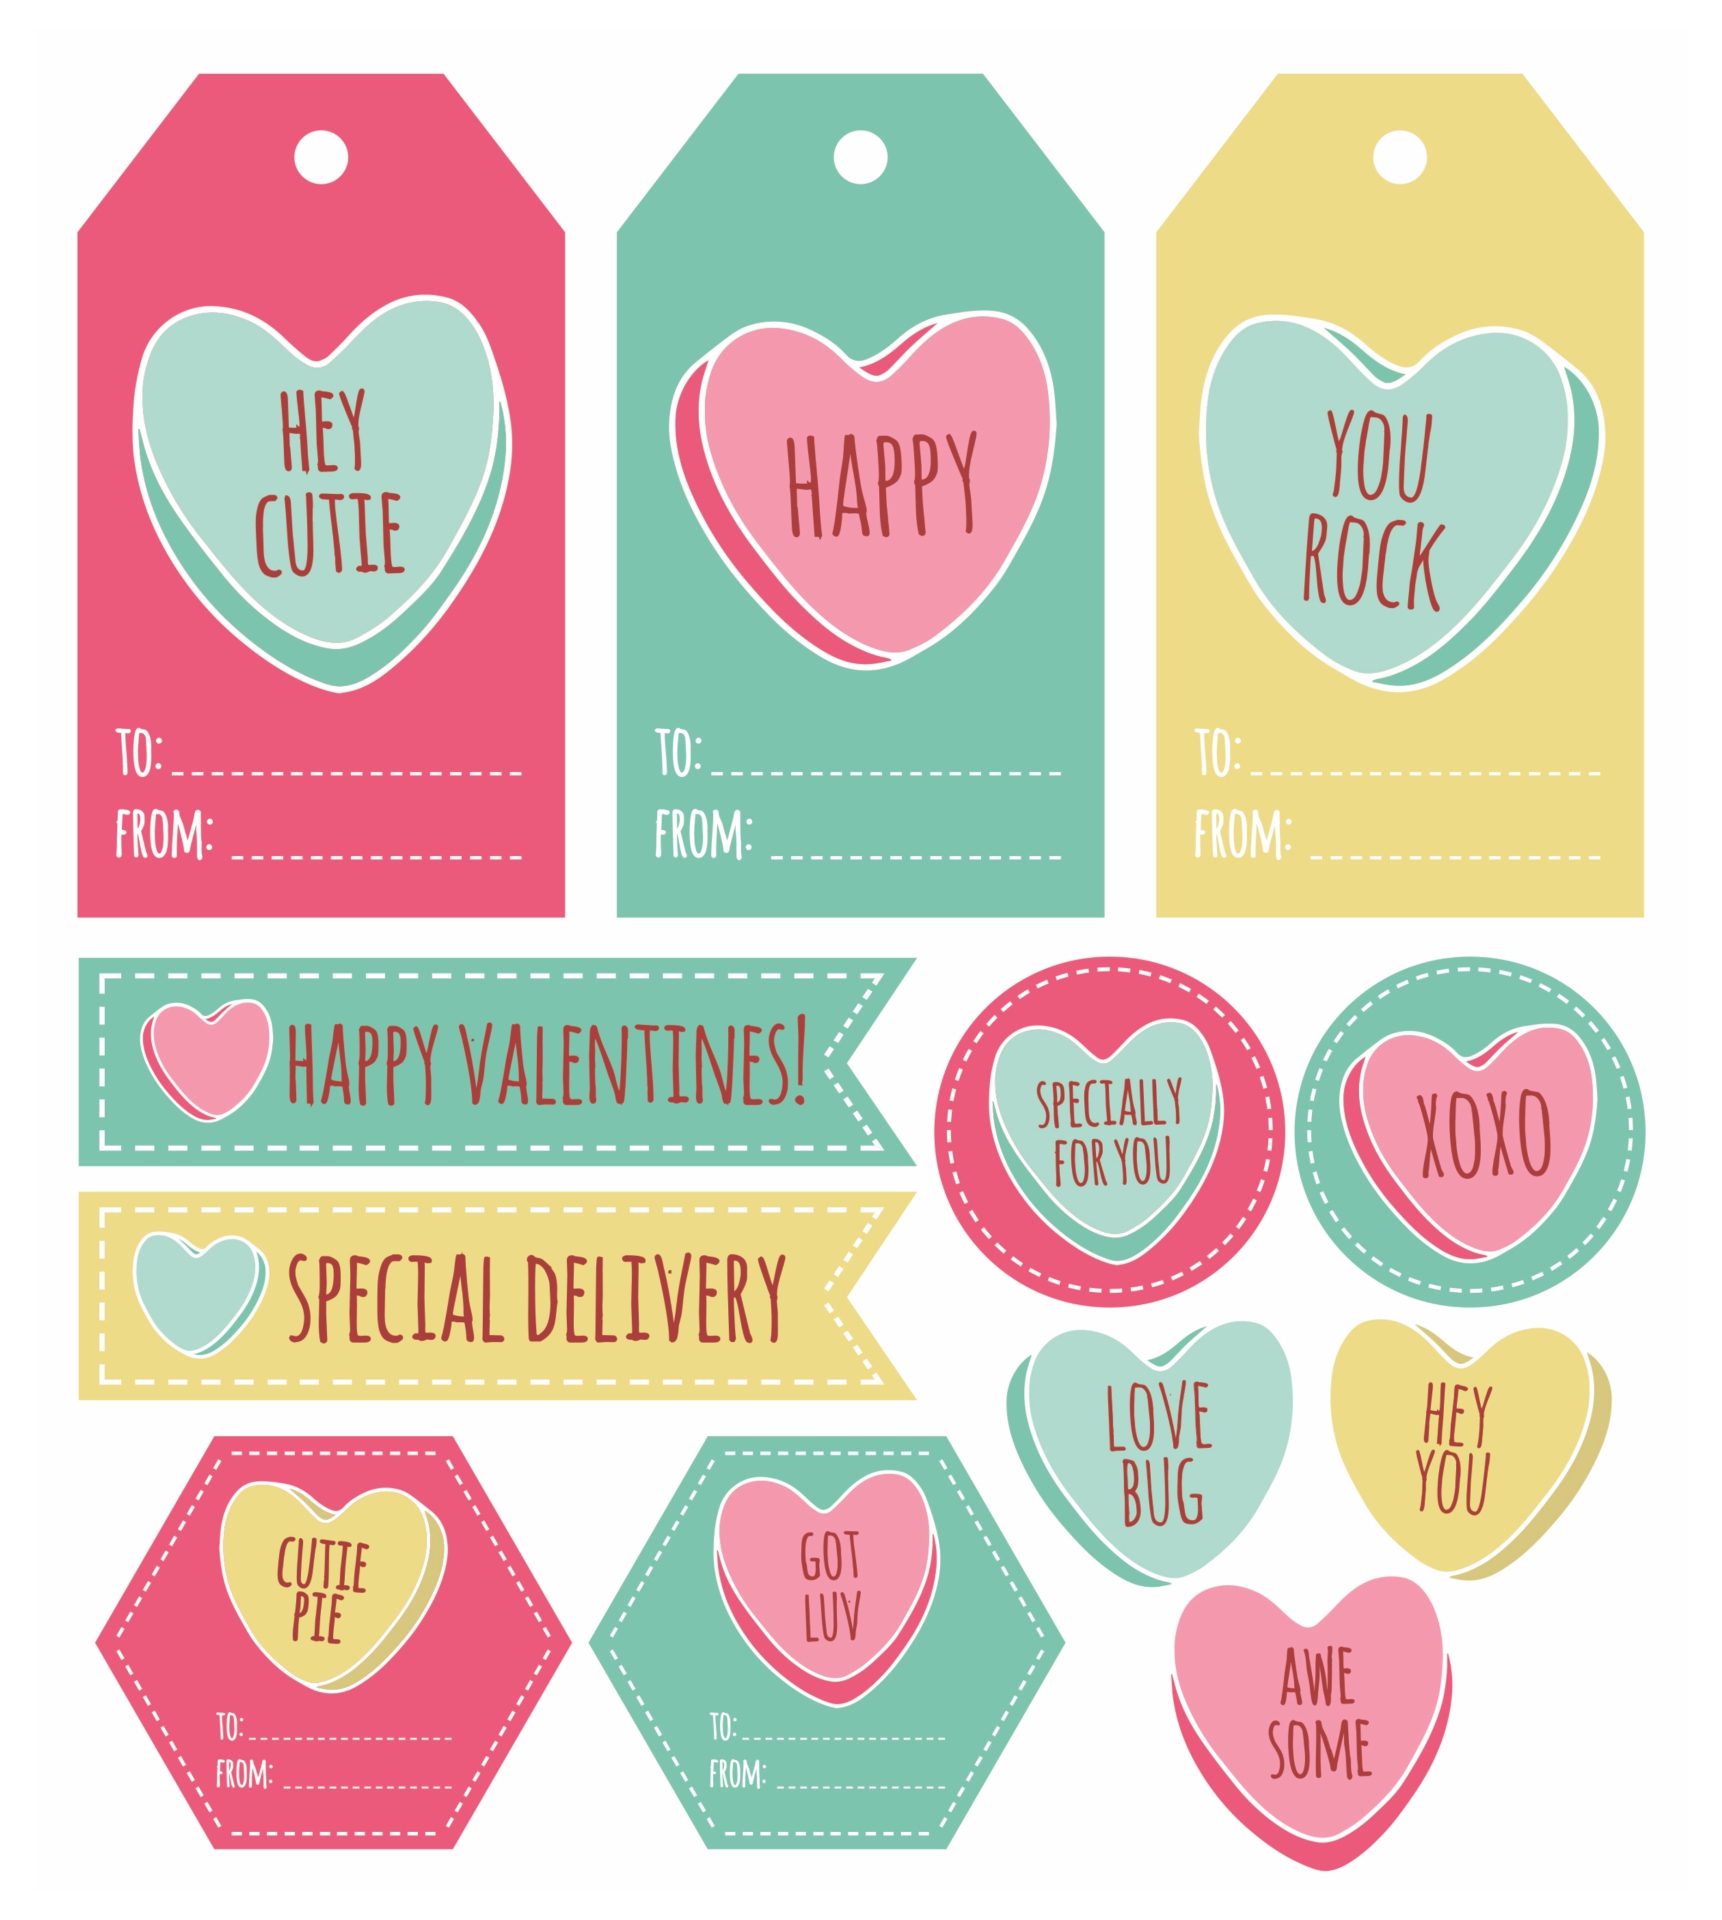 4 Best Images of Free Printable Gift Tags Valentine's Day Free